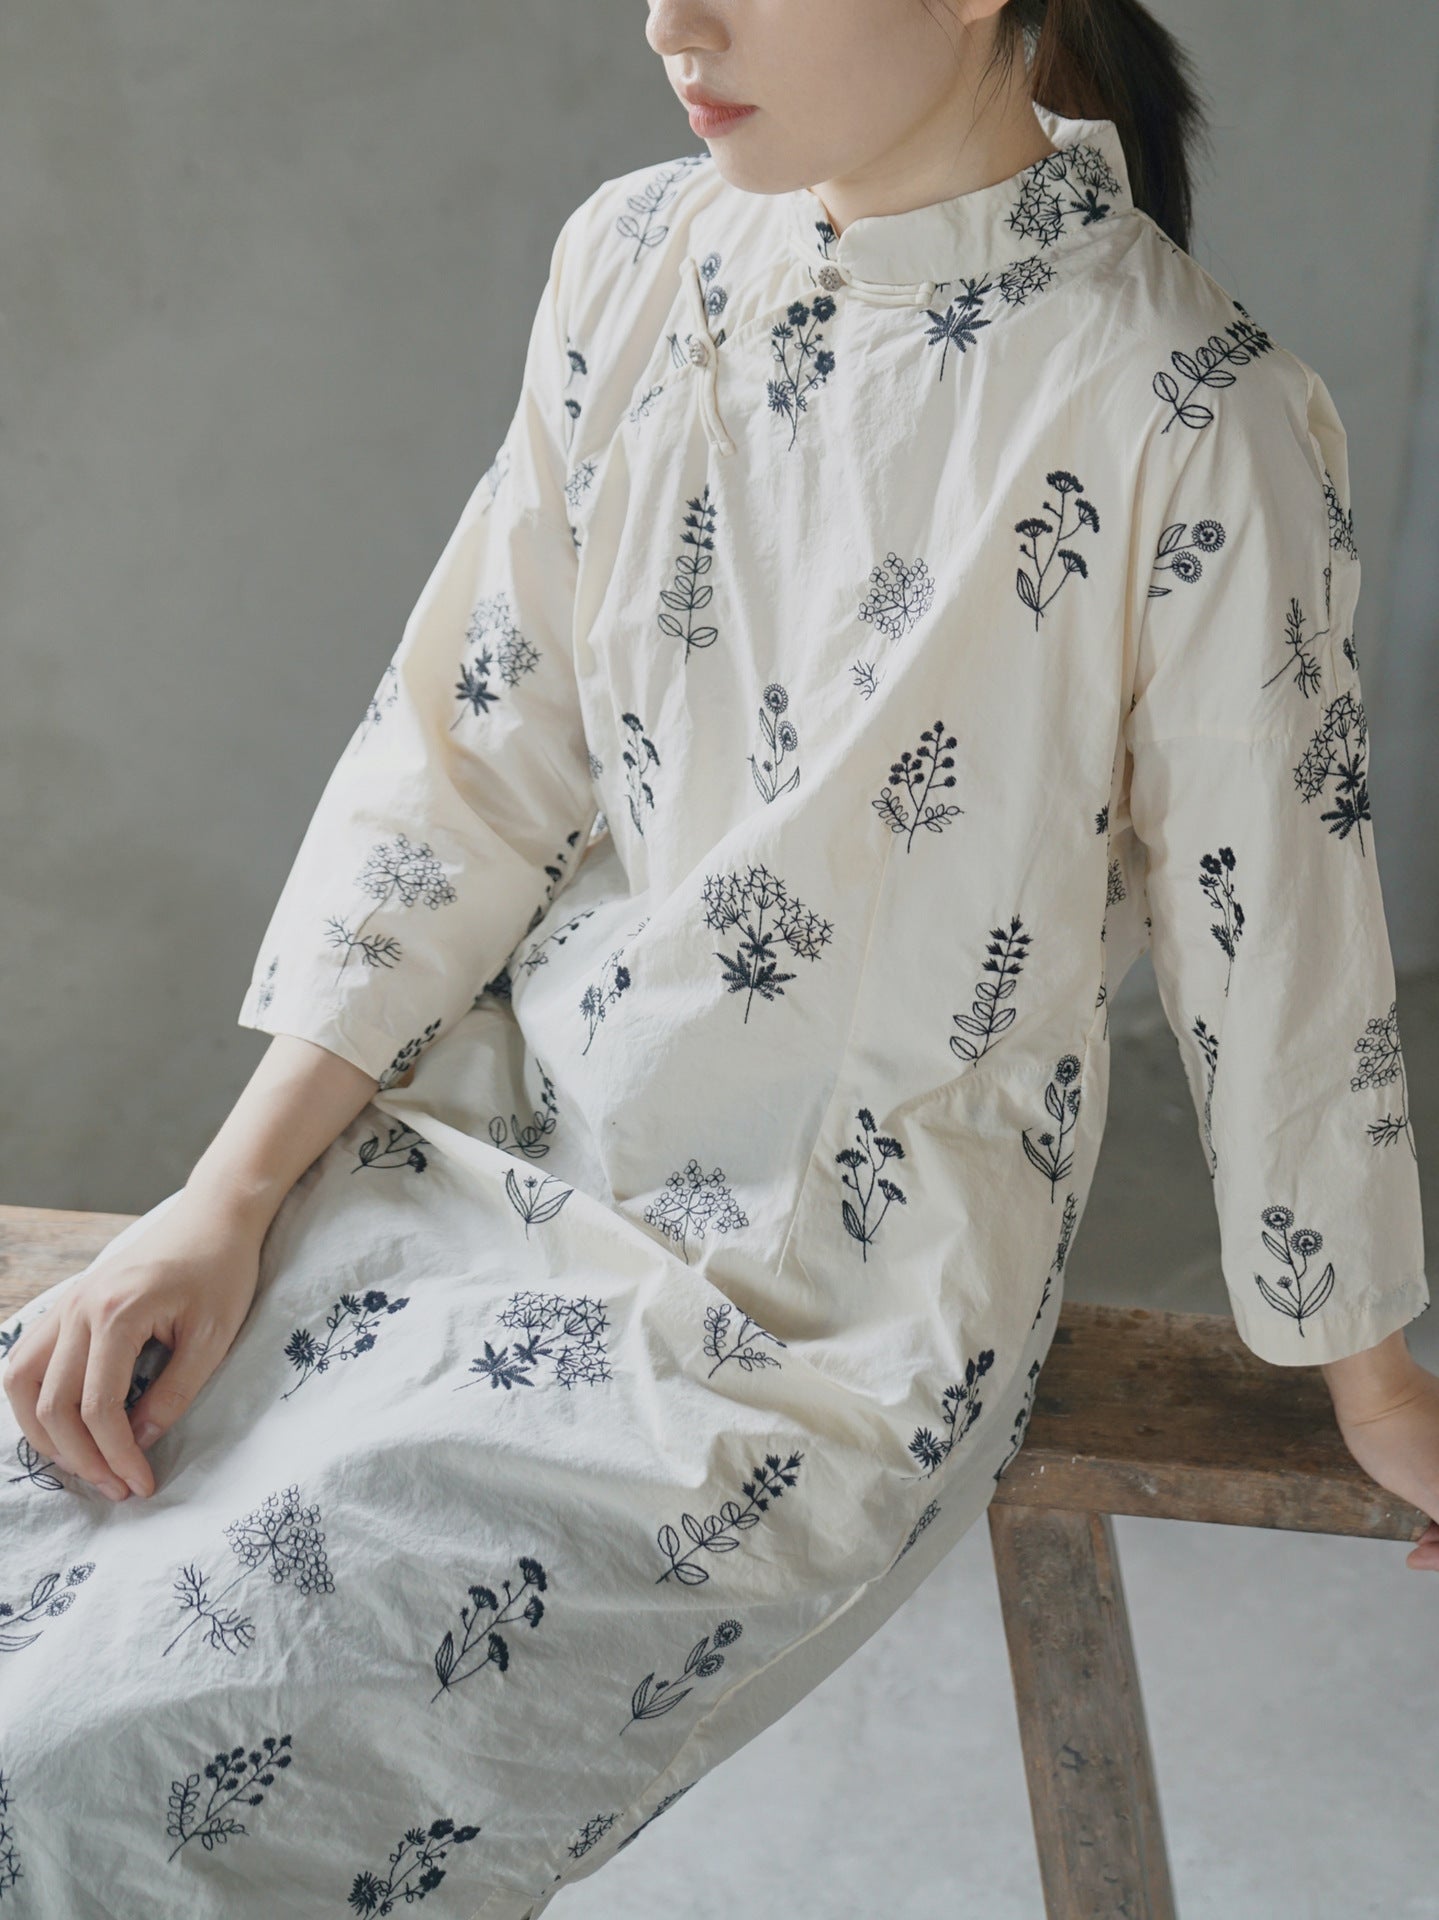 Floral Embroidered Cheongsam Dress in Off White